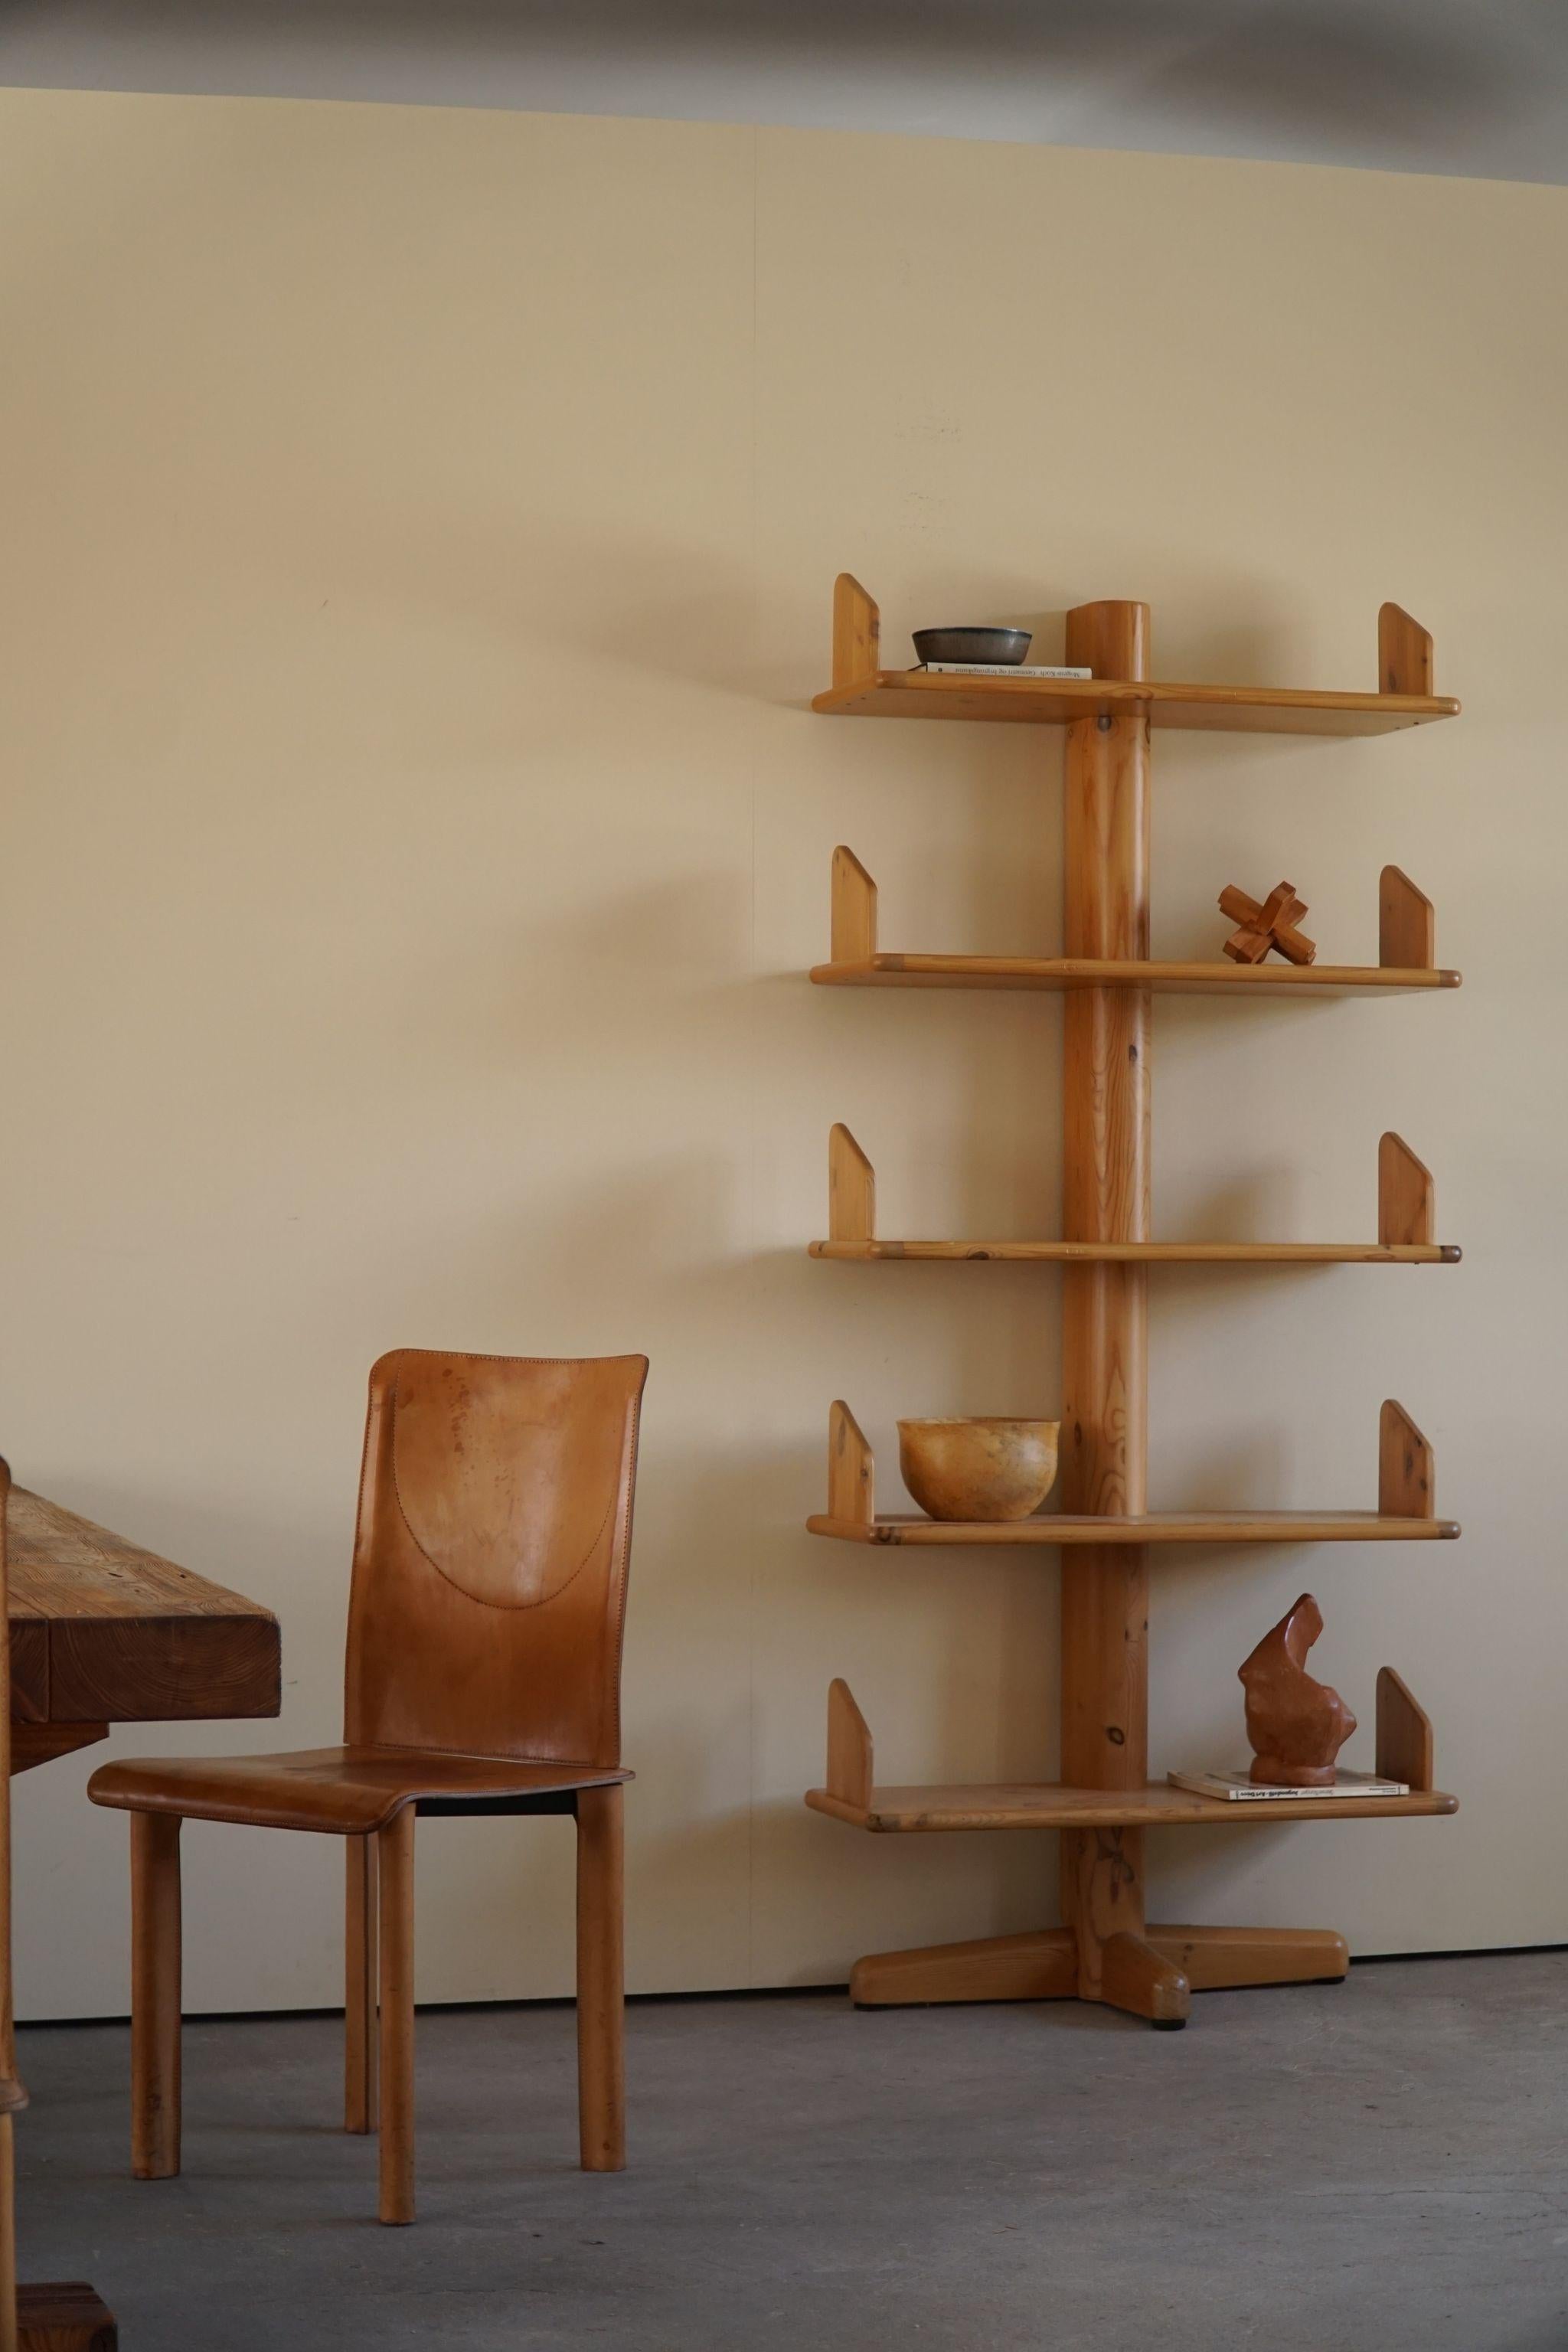 Rare freestanding shelving unit in solid pine. Designed by Rainer Daumiller for Hirtshals Savvaerk. Ca 1970s. 
A rare object with beautiful wood grains.

This vintage object is in a really good condition, with minimal signs of wear.

This